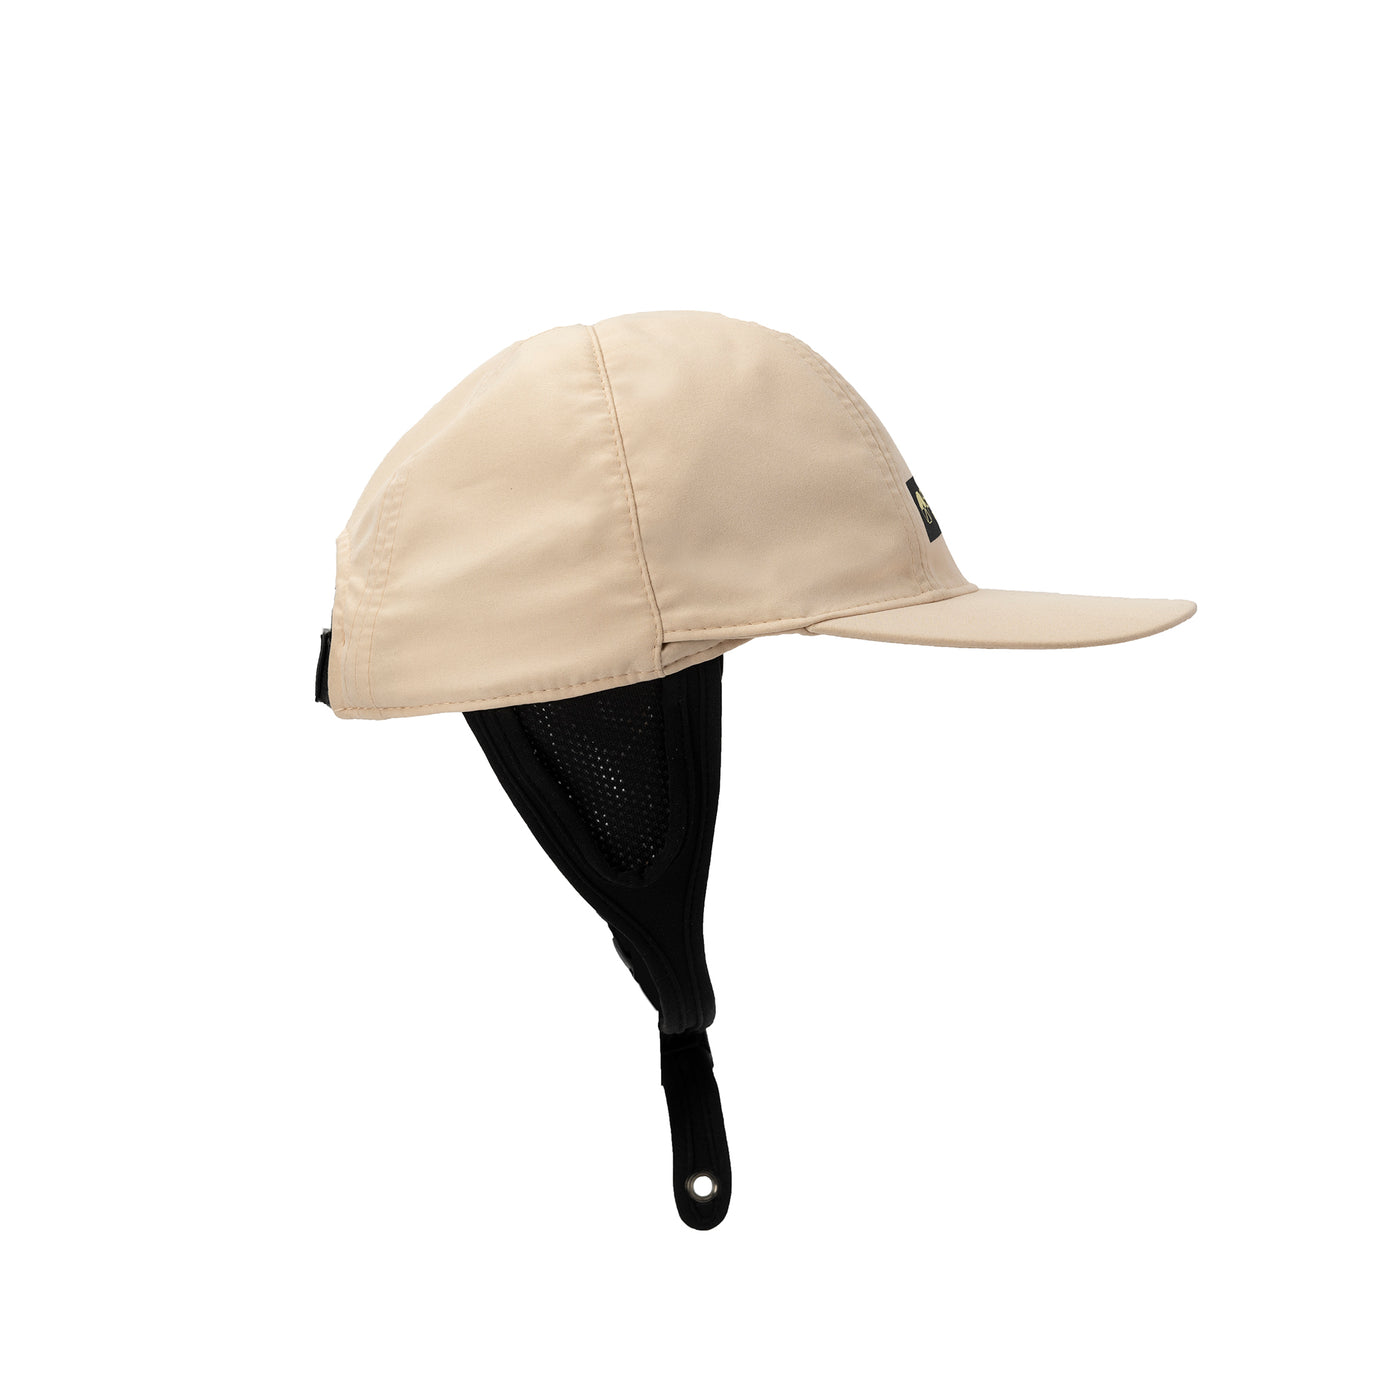 Ho Stevie! Floating Surf Cap with Chin Straps and Removable Neck Flap for  Surfing, SUP, and Watersports